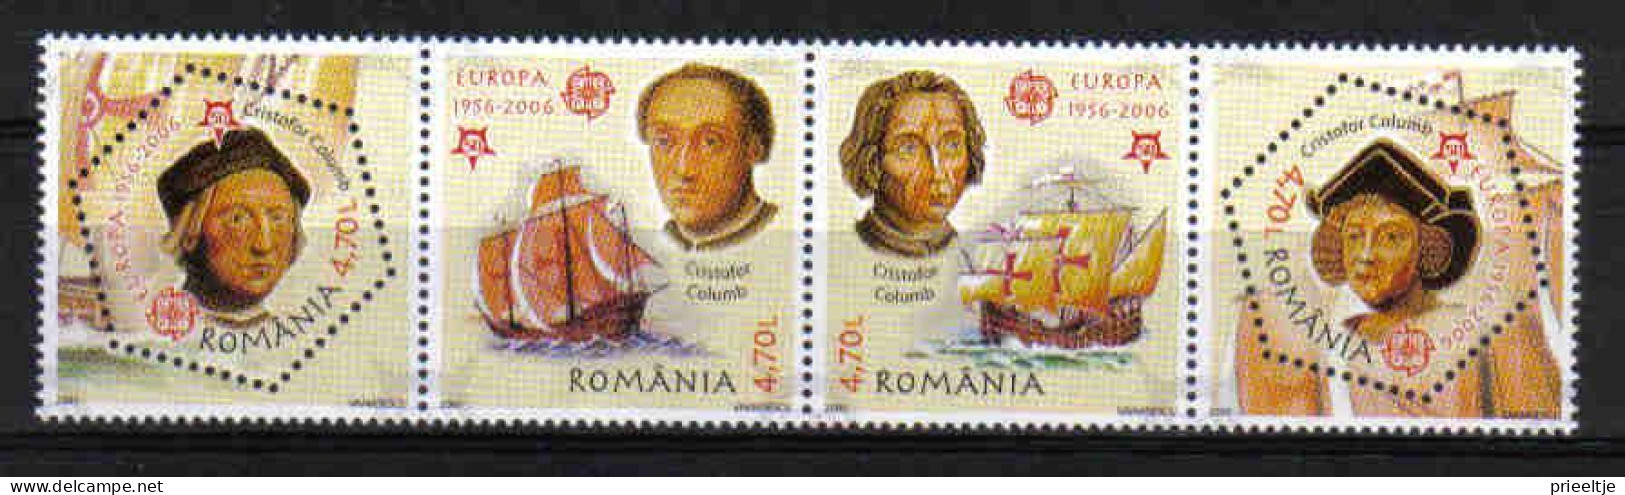 Romania 2006 50th Anniv. Of Europa Stamps Strip Y.T. 5011/5014 ** - Neufs